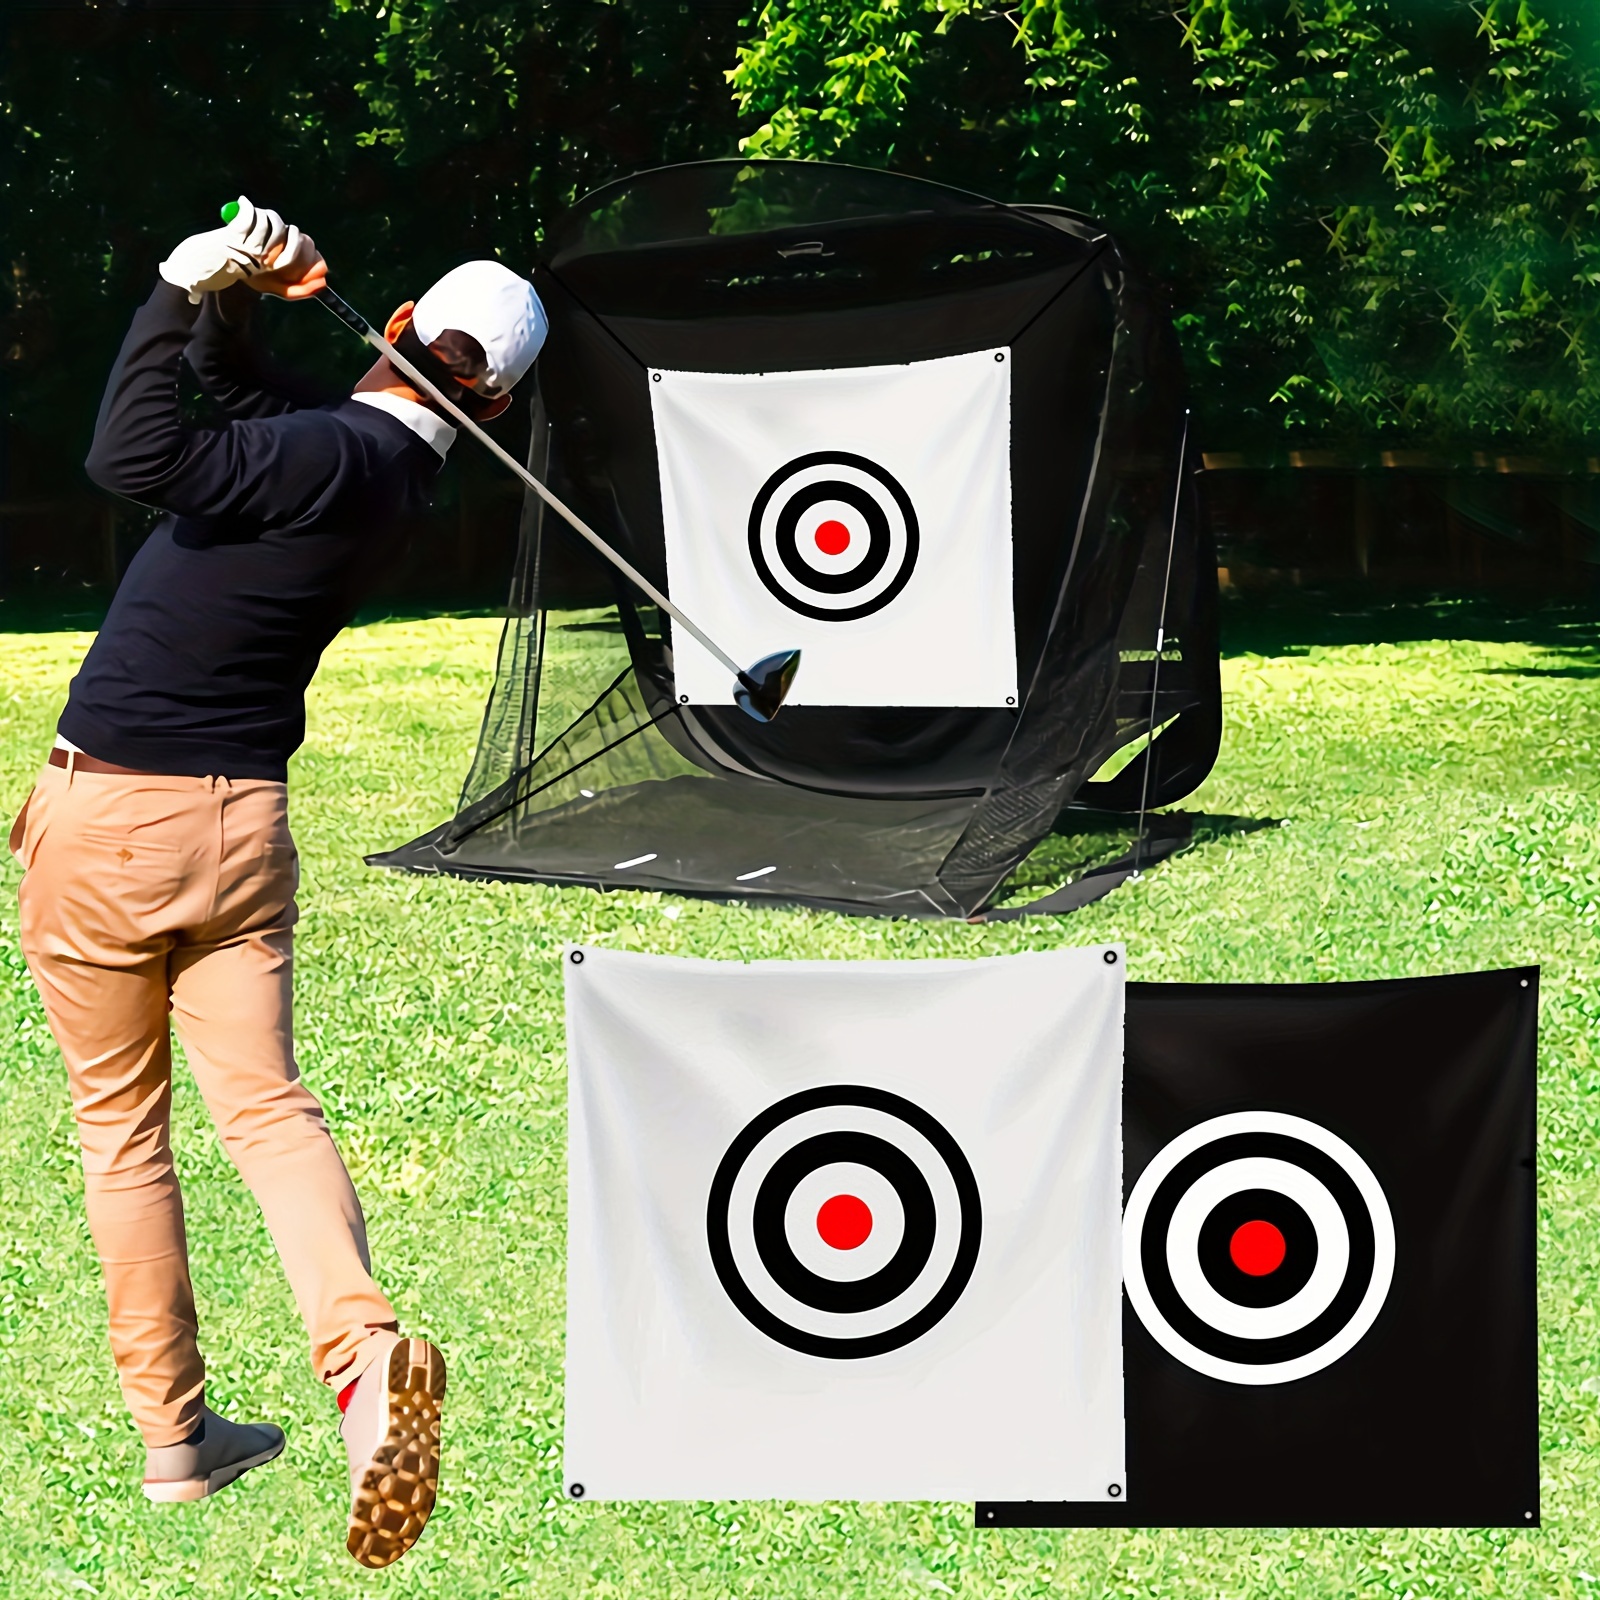 Golf Target Cloth 58 X 59 Hitting Targets For Driving Range Backyard  Outdoor Indoor, Swing Training Aids